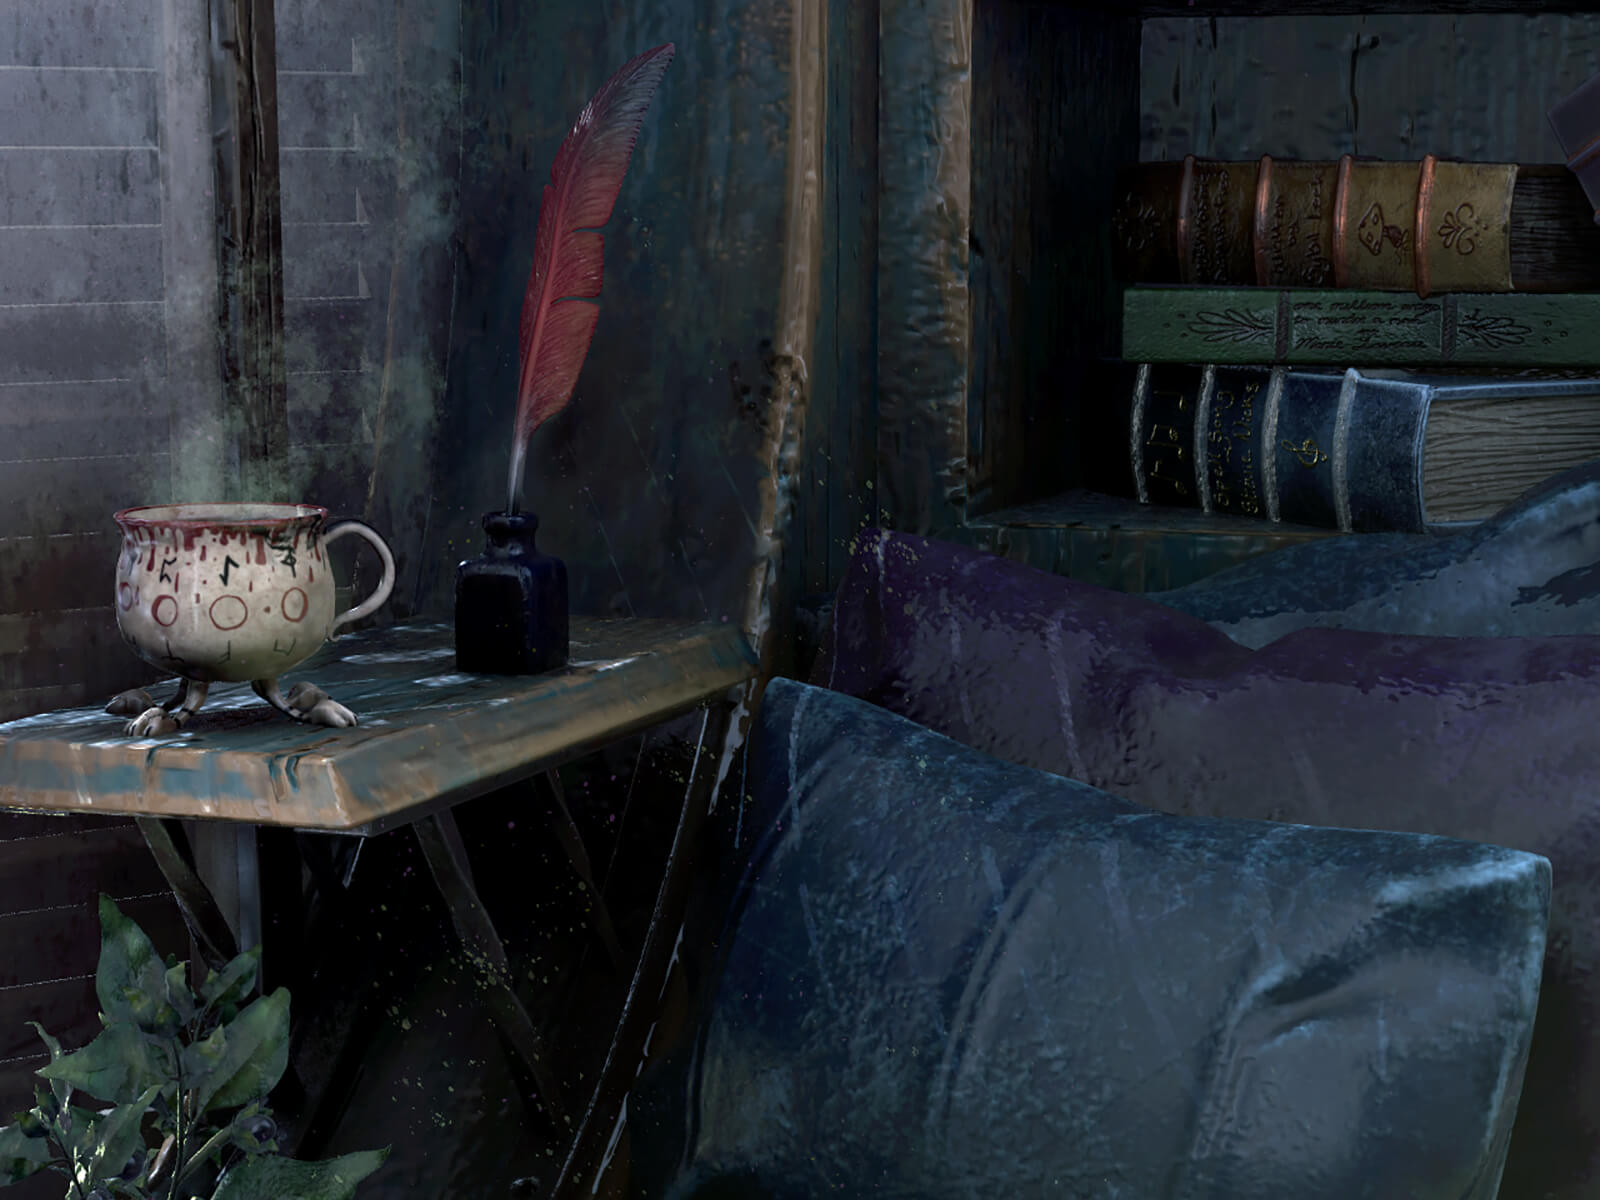 A spot for reading with pillows, a book, an ink well, and quill.